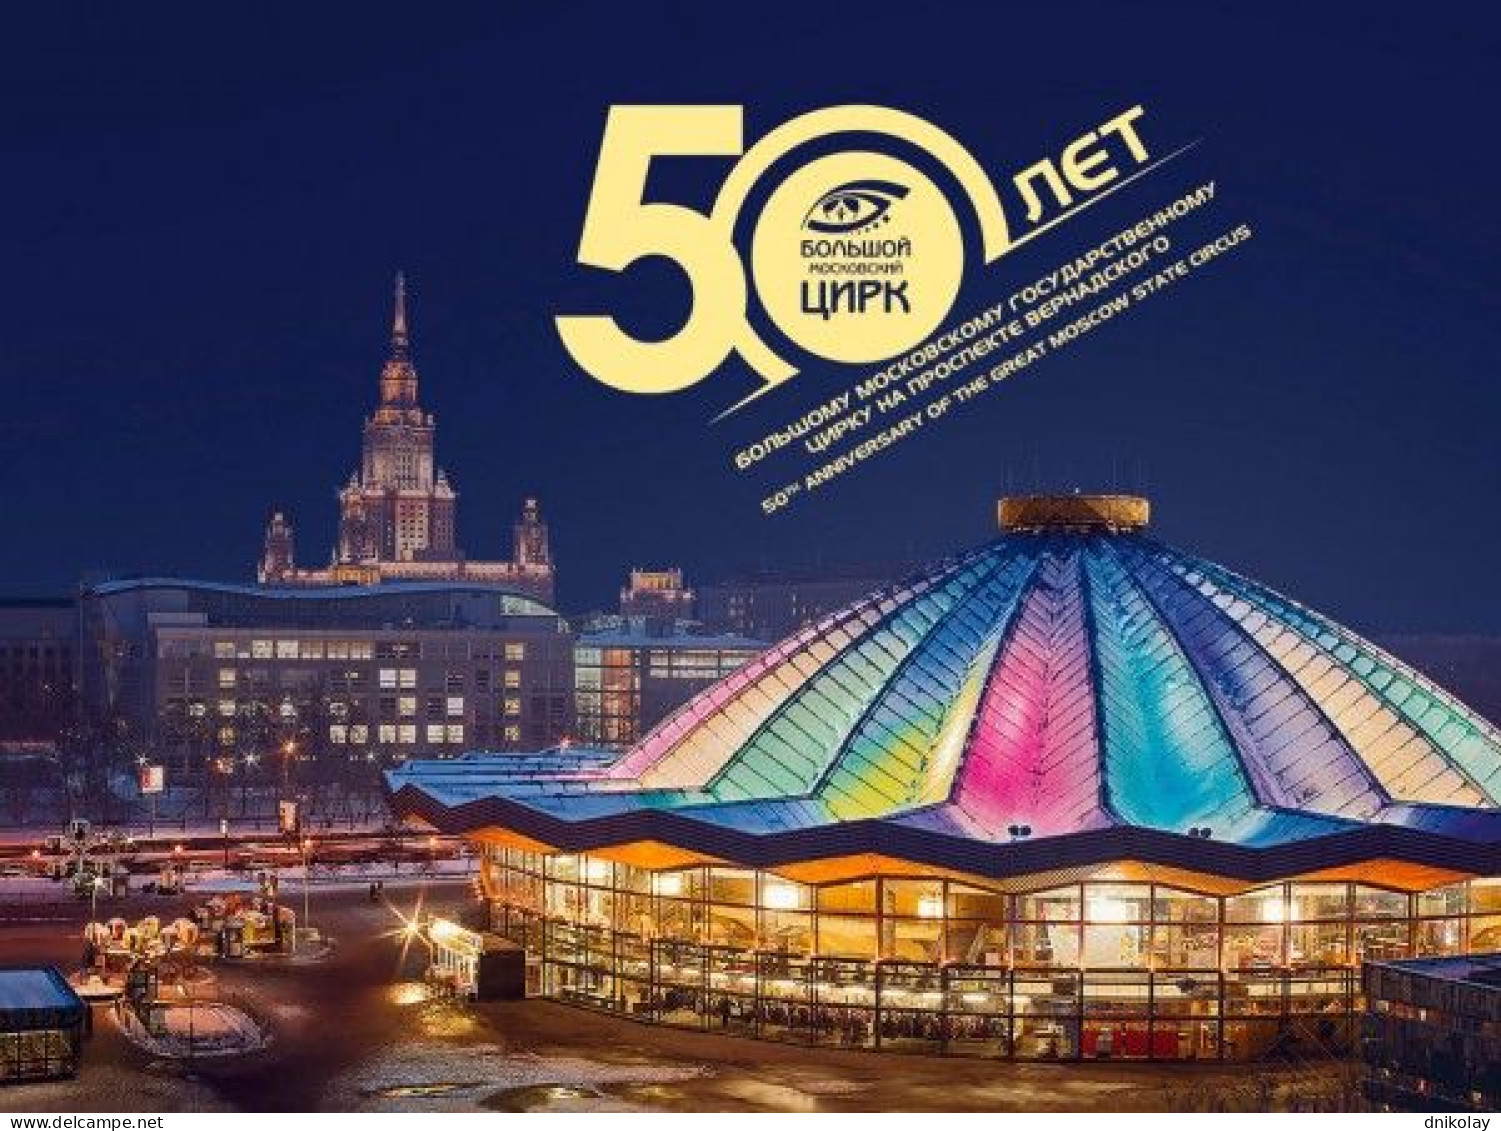 2021 3008 Russia Booklet The 50th Anniversary Of The Great Moscow State Circus On Vernadsky Avenue MNH - Neufs